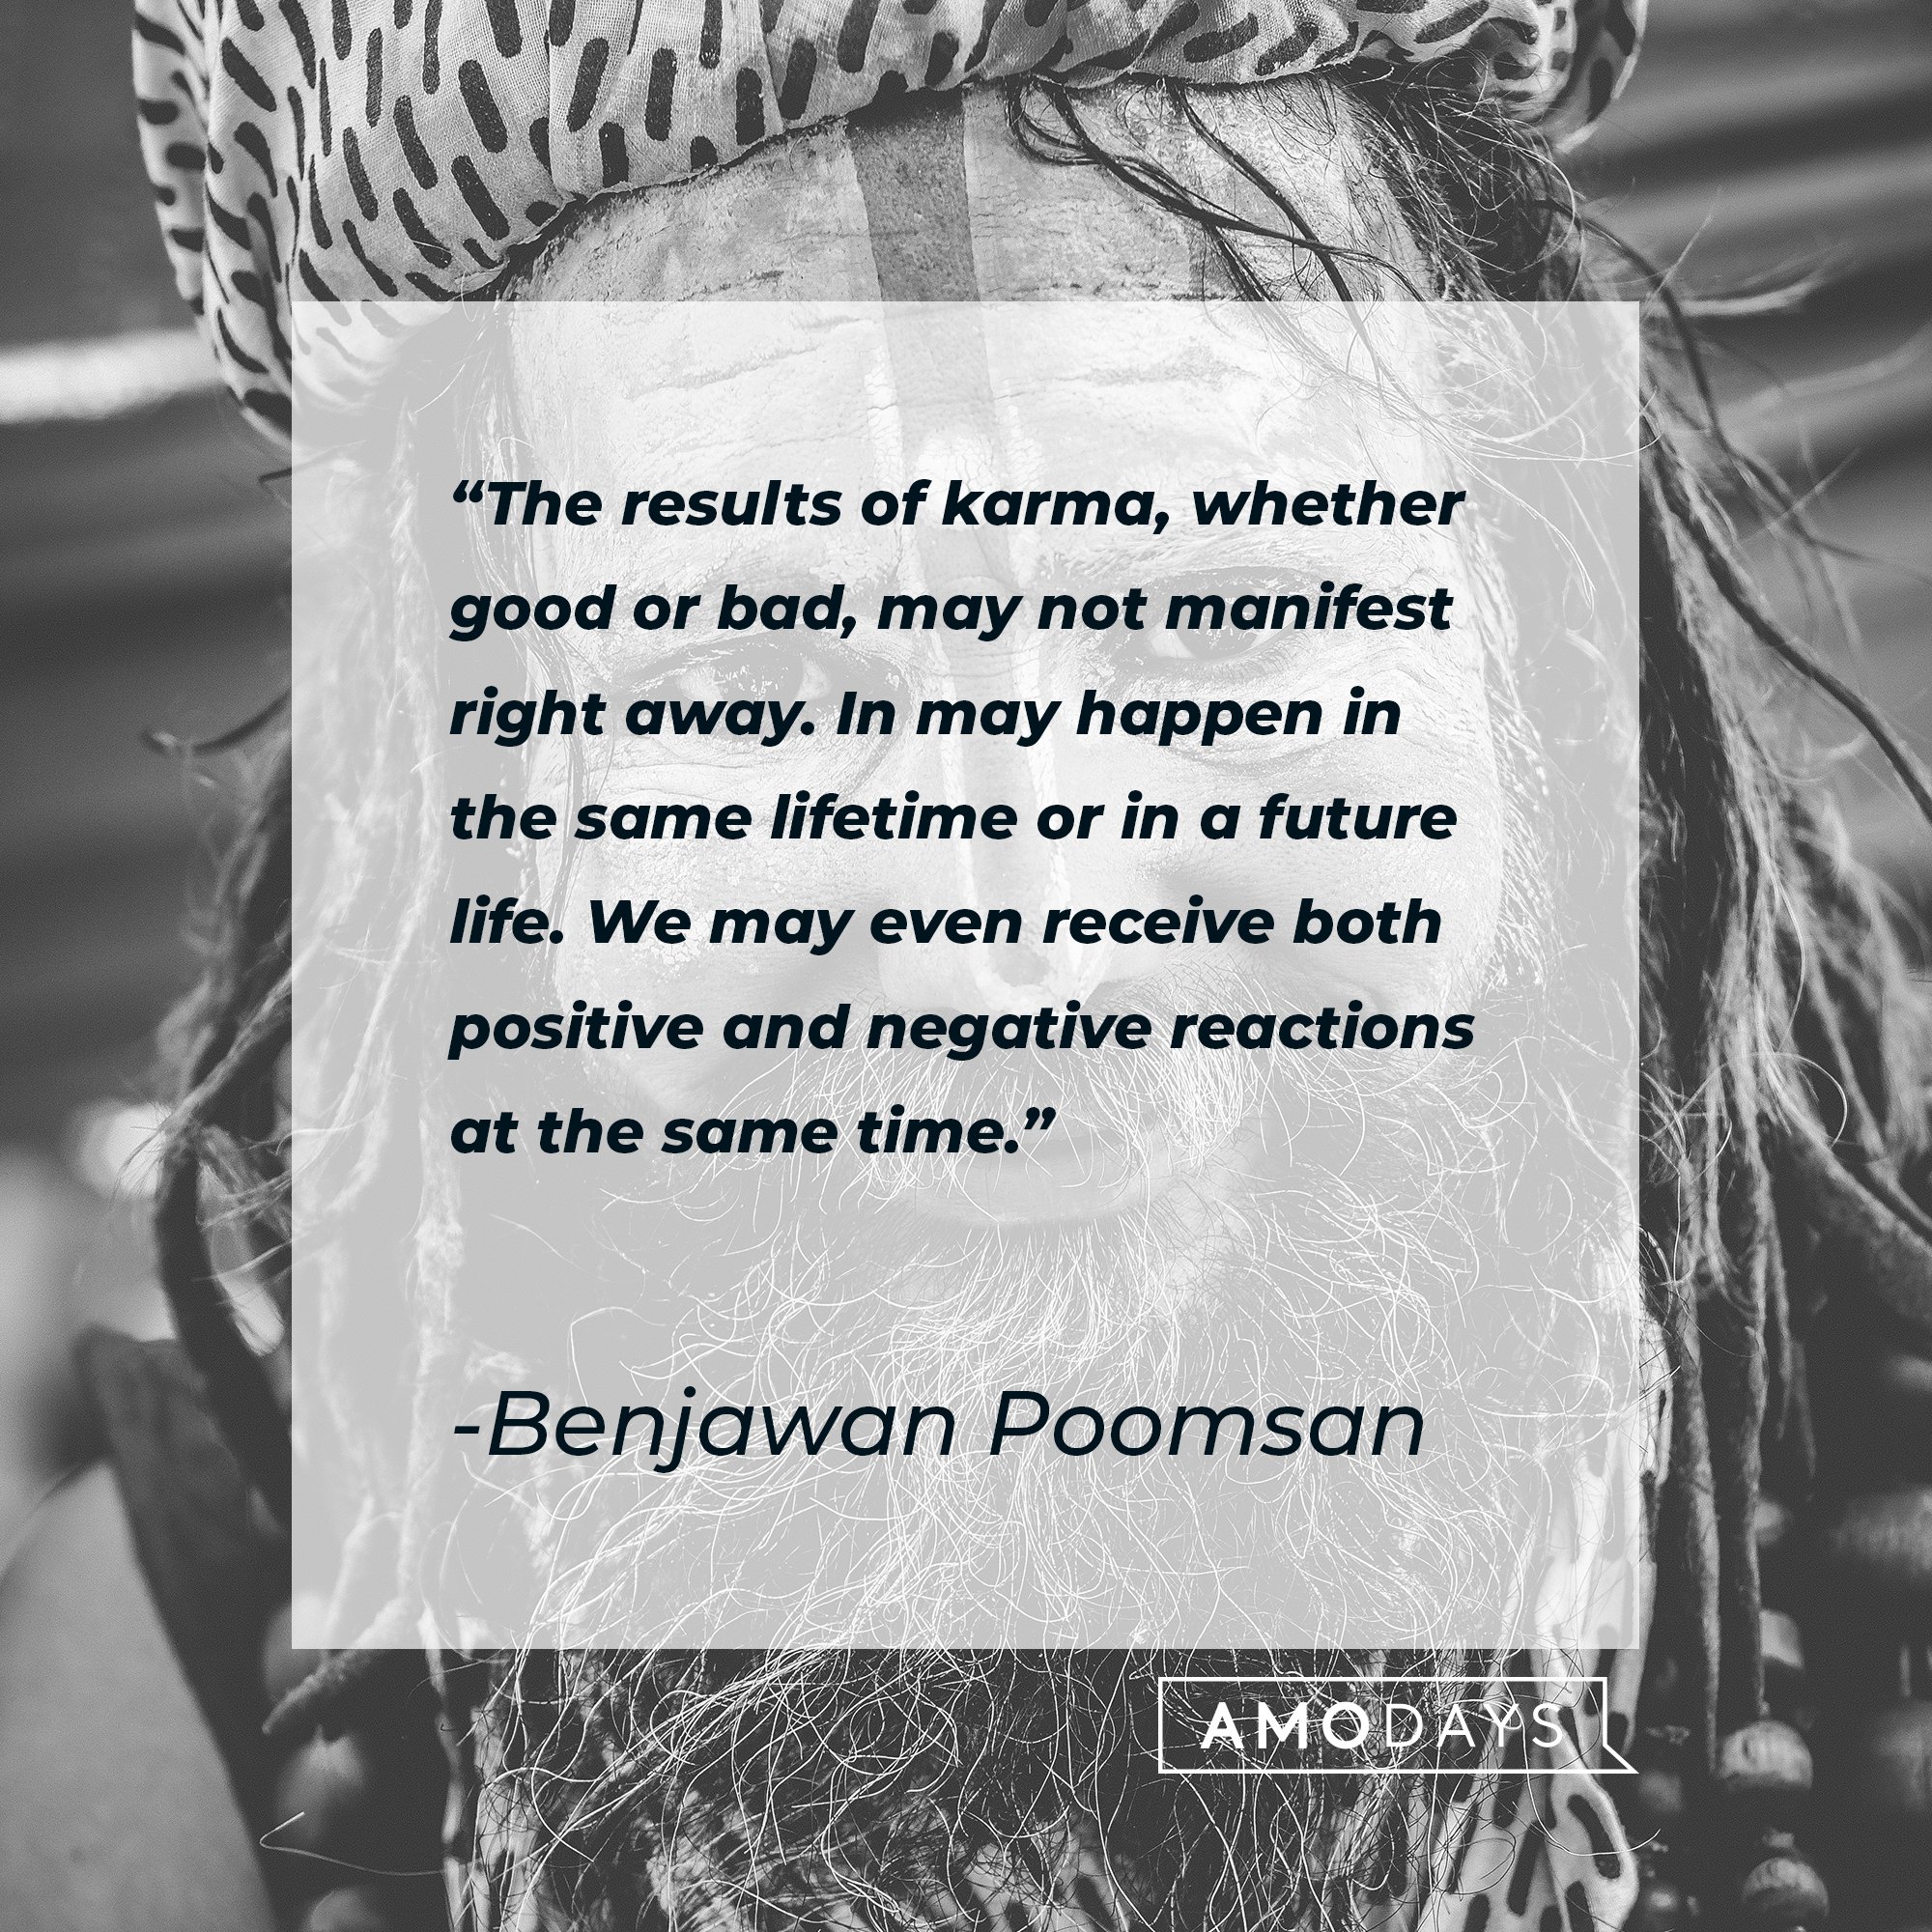 Benjawan Poomsan's quote: “The results of karma, whether good or bad, may not manifest right away. In may happen in the same lifetime or in a future life. We may even receive both positive and negative reactions at the same time.” | Image: AmoDays